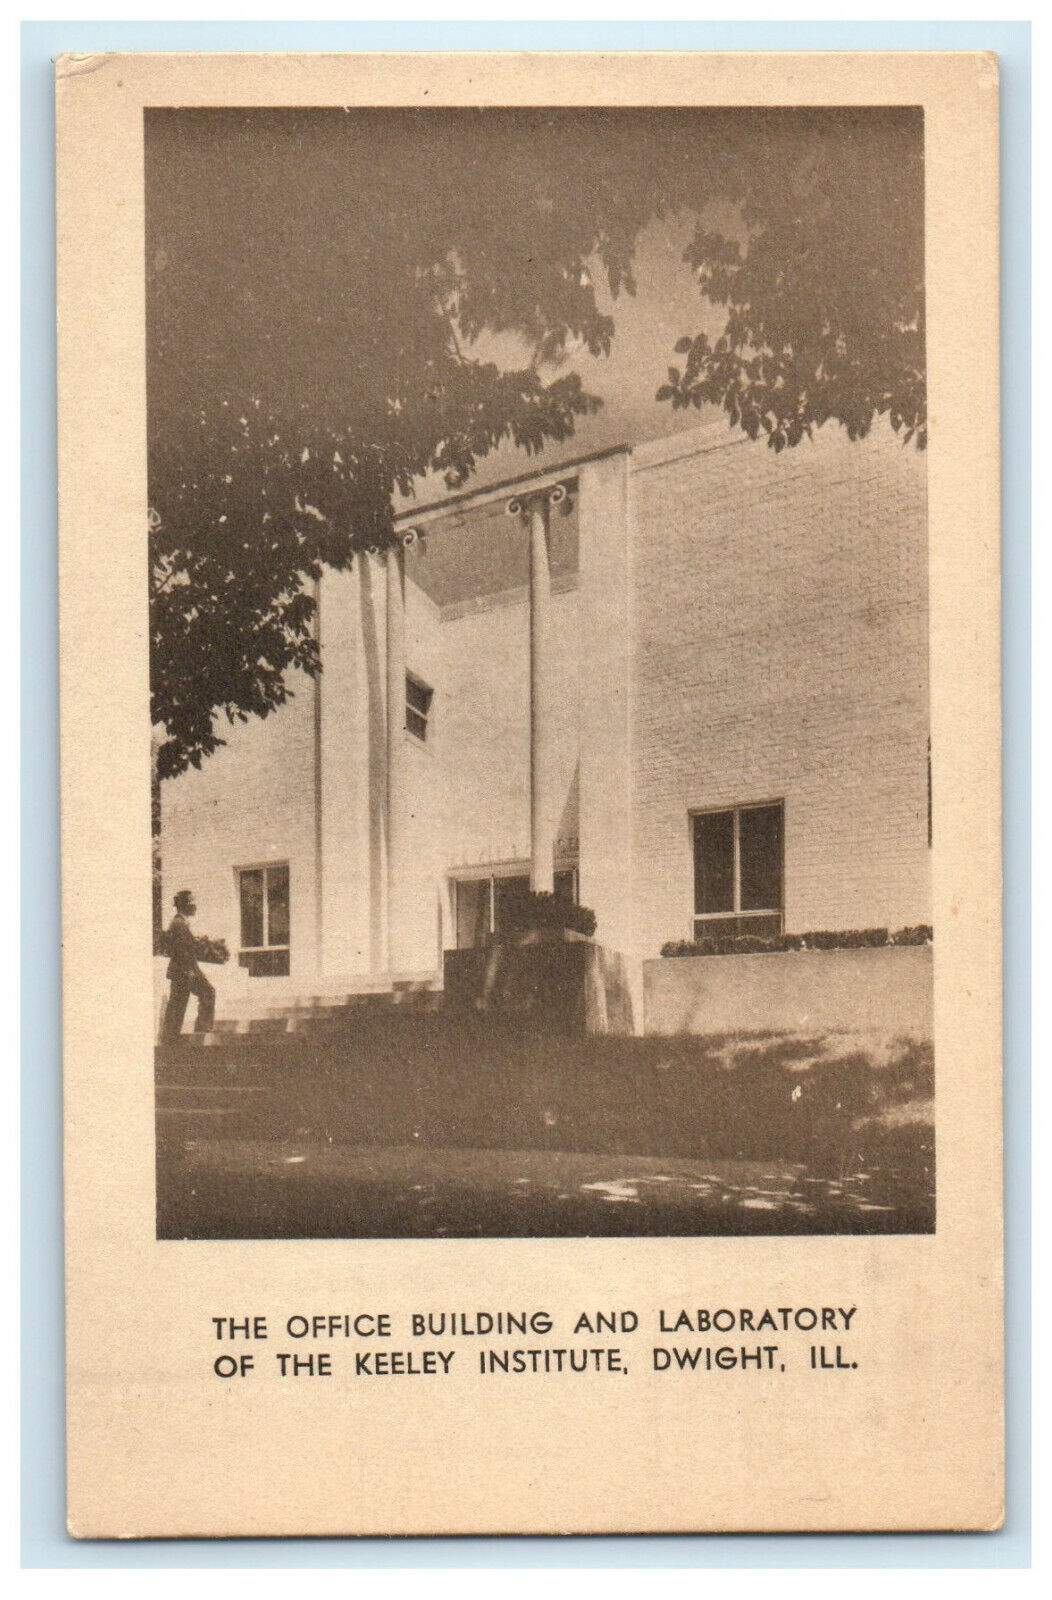 c1940s The Office Building and Laboratory of Keeley Institute Dwight IL Postcard